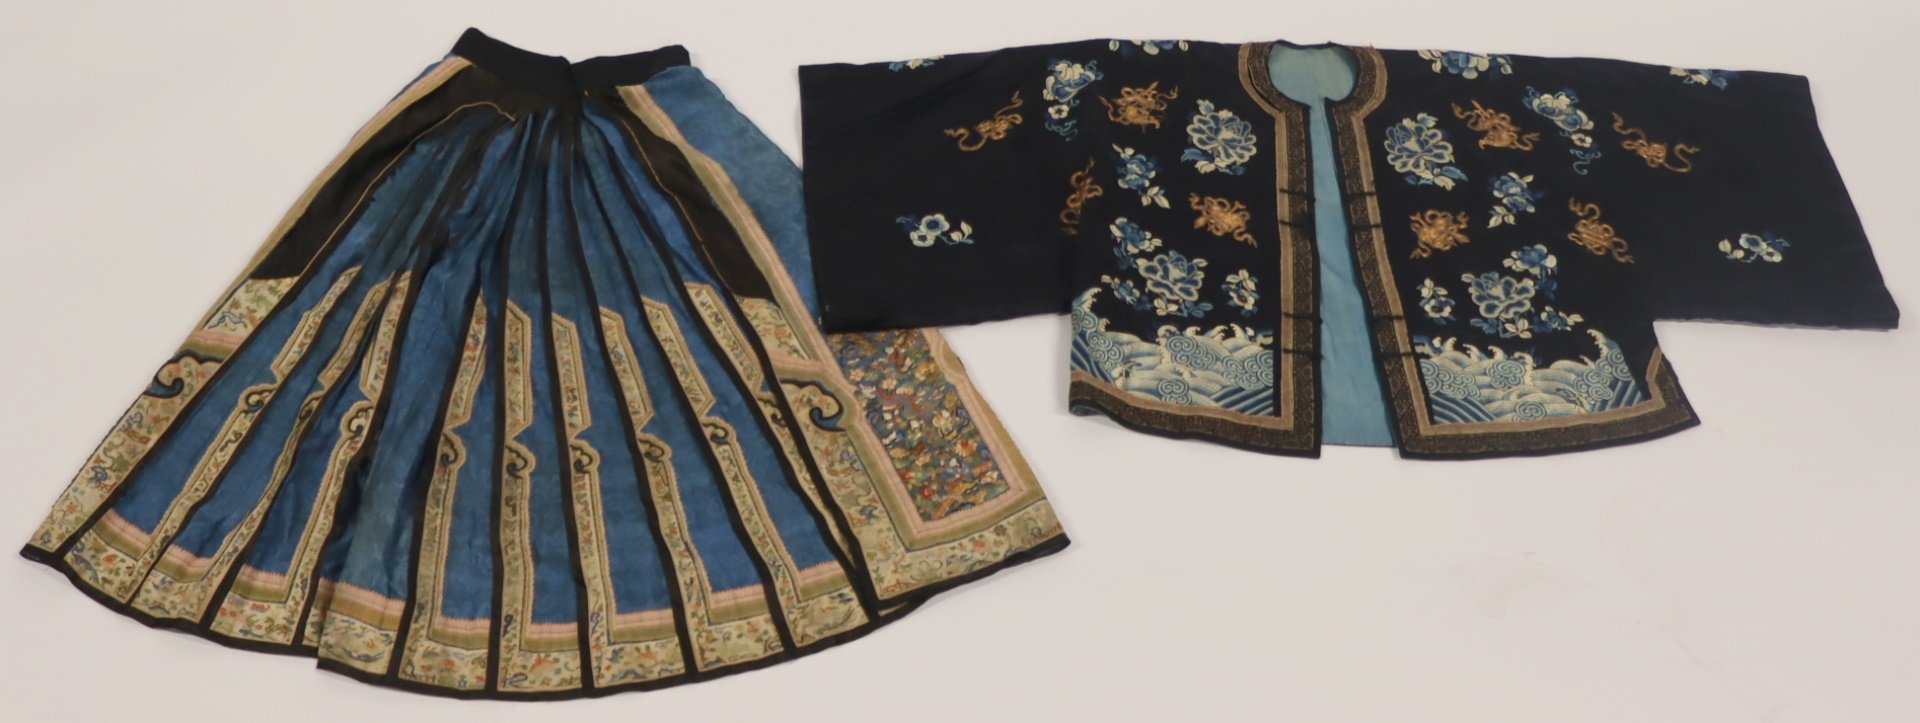 ANTIQUE CHINESE EMBROIDERED JACKET